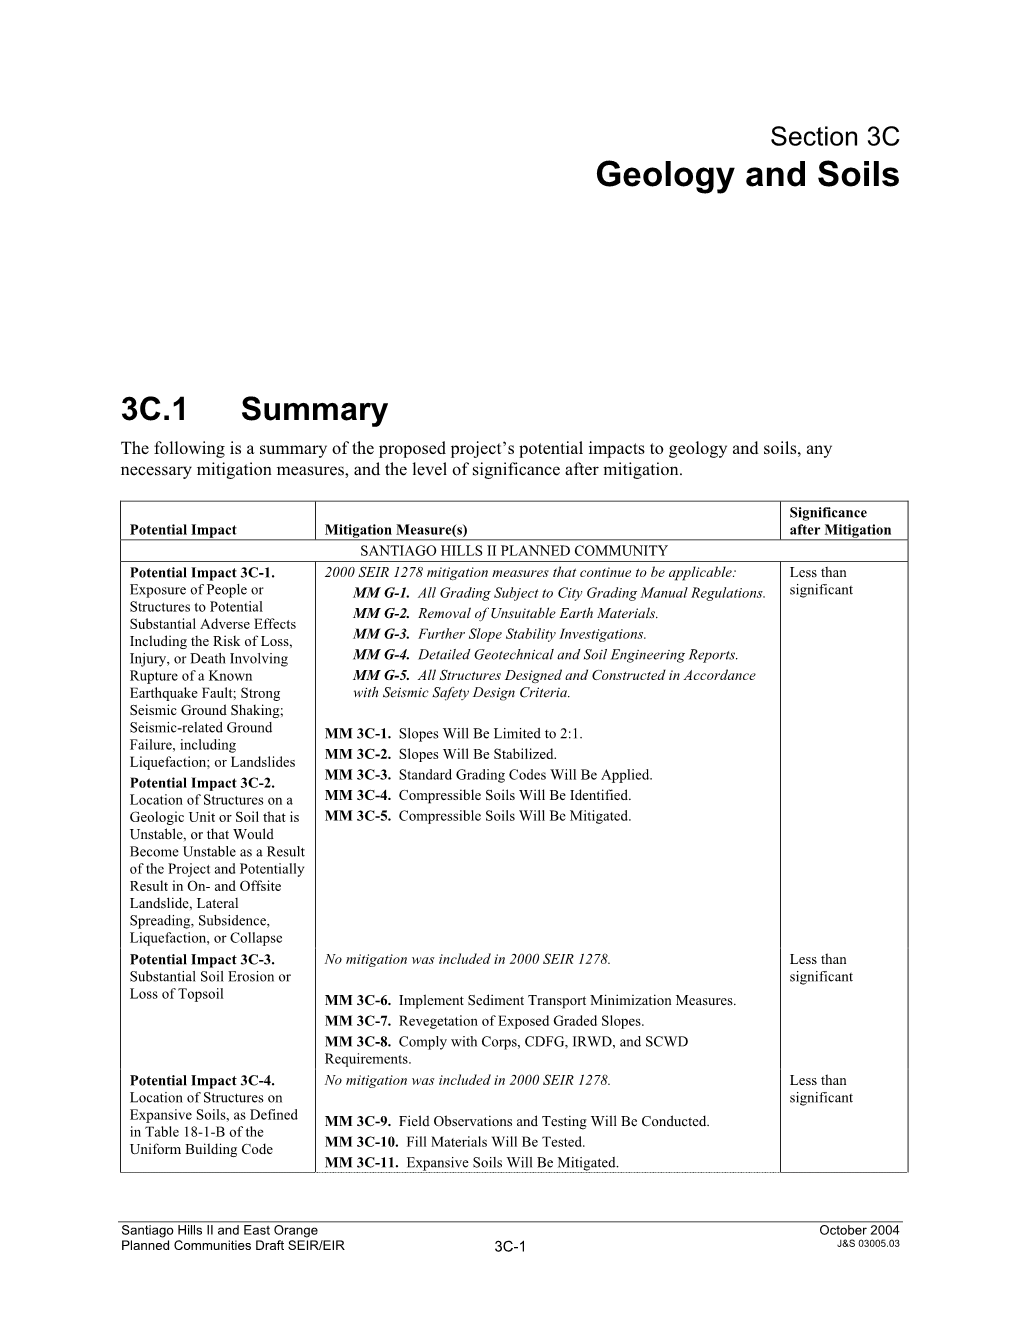 Geology and Soils